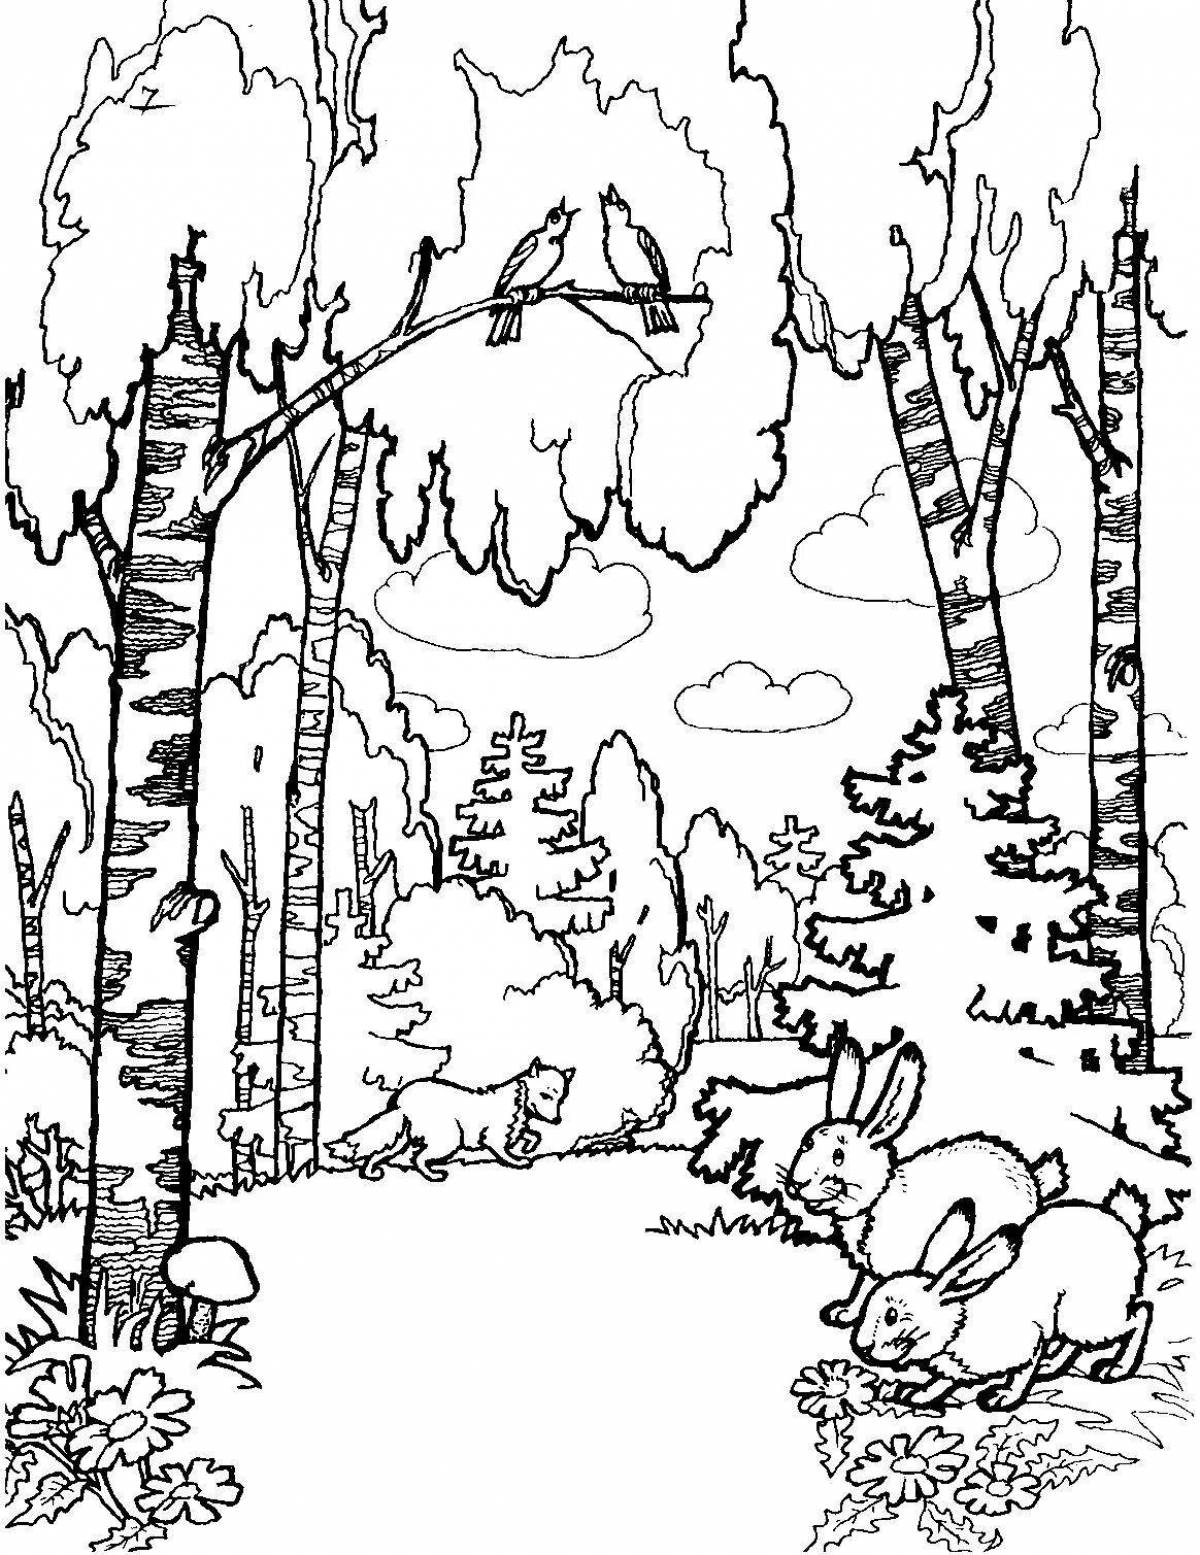 Vibrant grove coloring book for kids